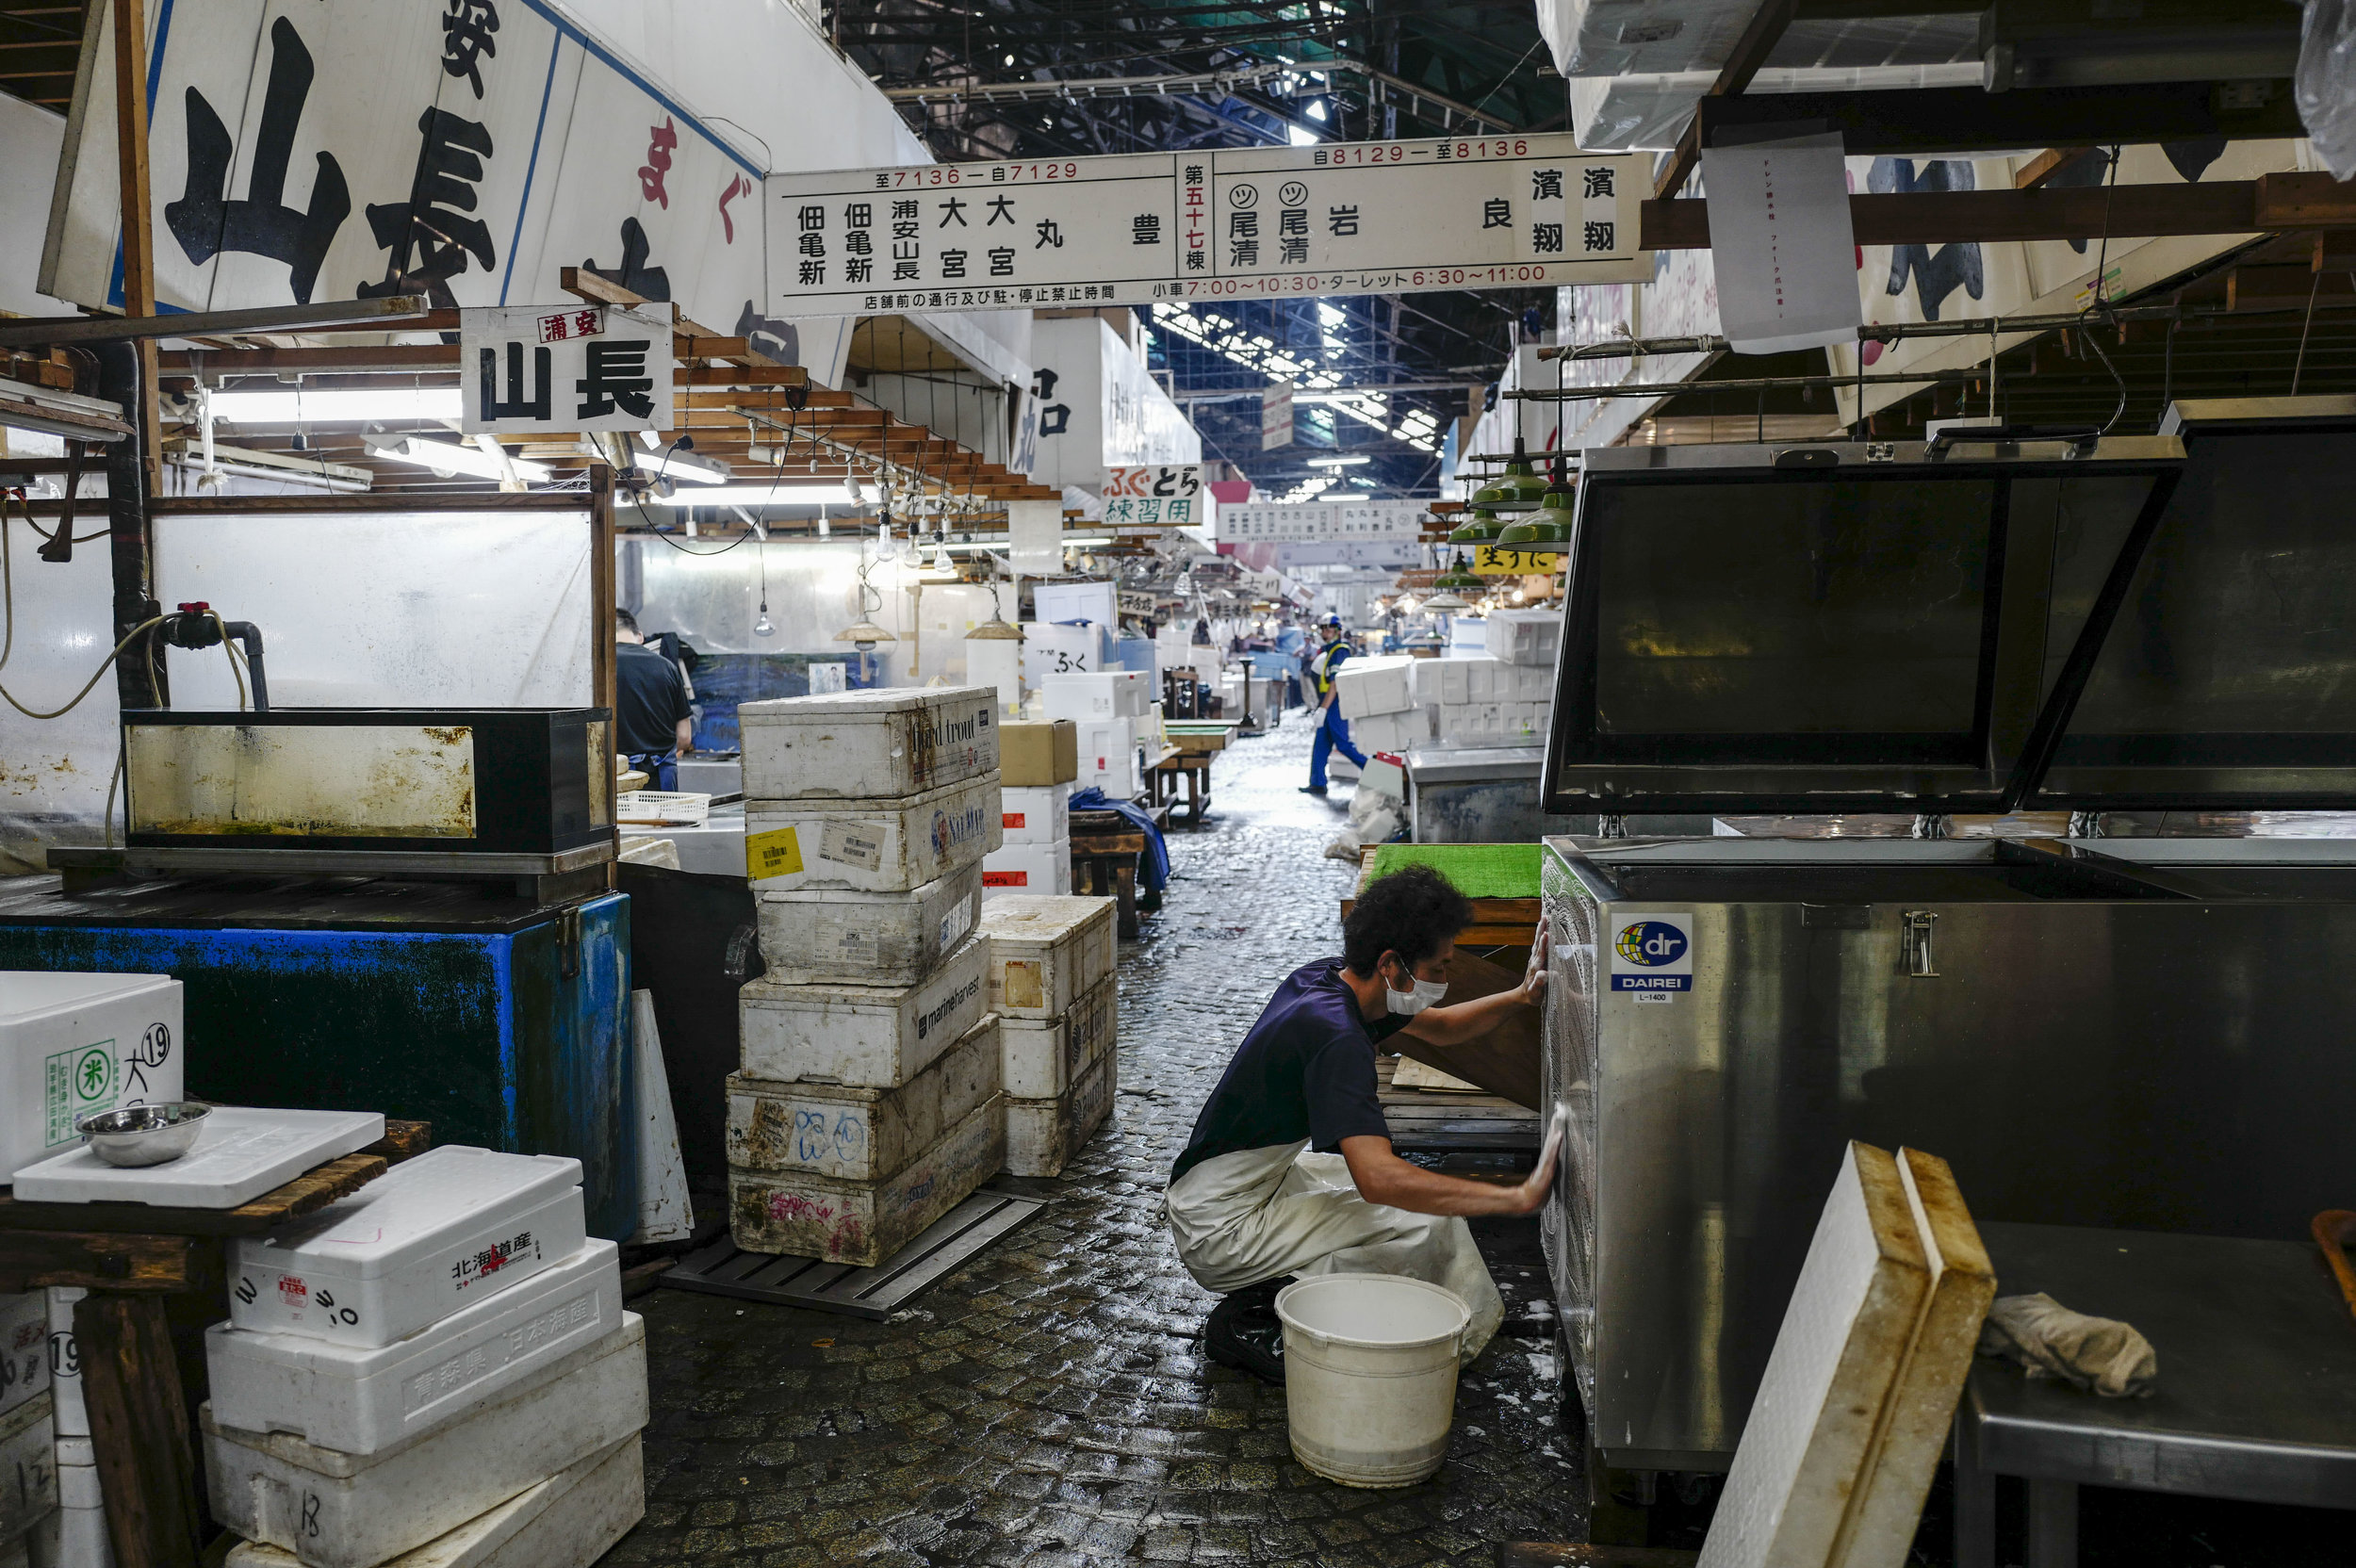  A wholeseller cleans up his store in Tsukiji fish wholesale market during its final day of operations ahead of relocation to the nearby Toyosu waterfront district, in Tokyo on Oct. 6, 2018. The world's largest fish market, which has been in operatio